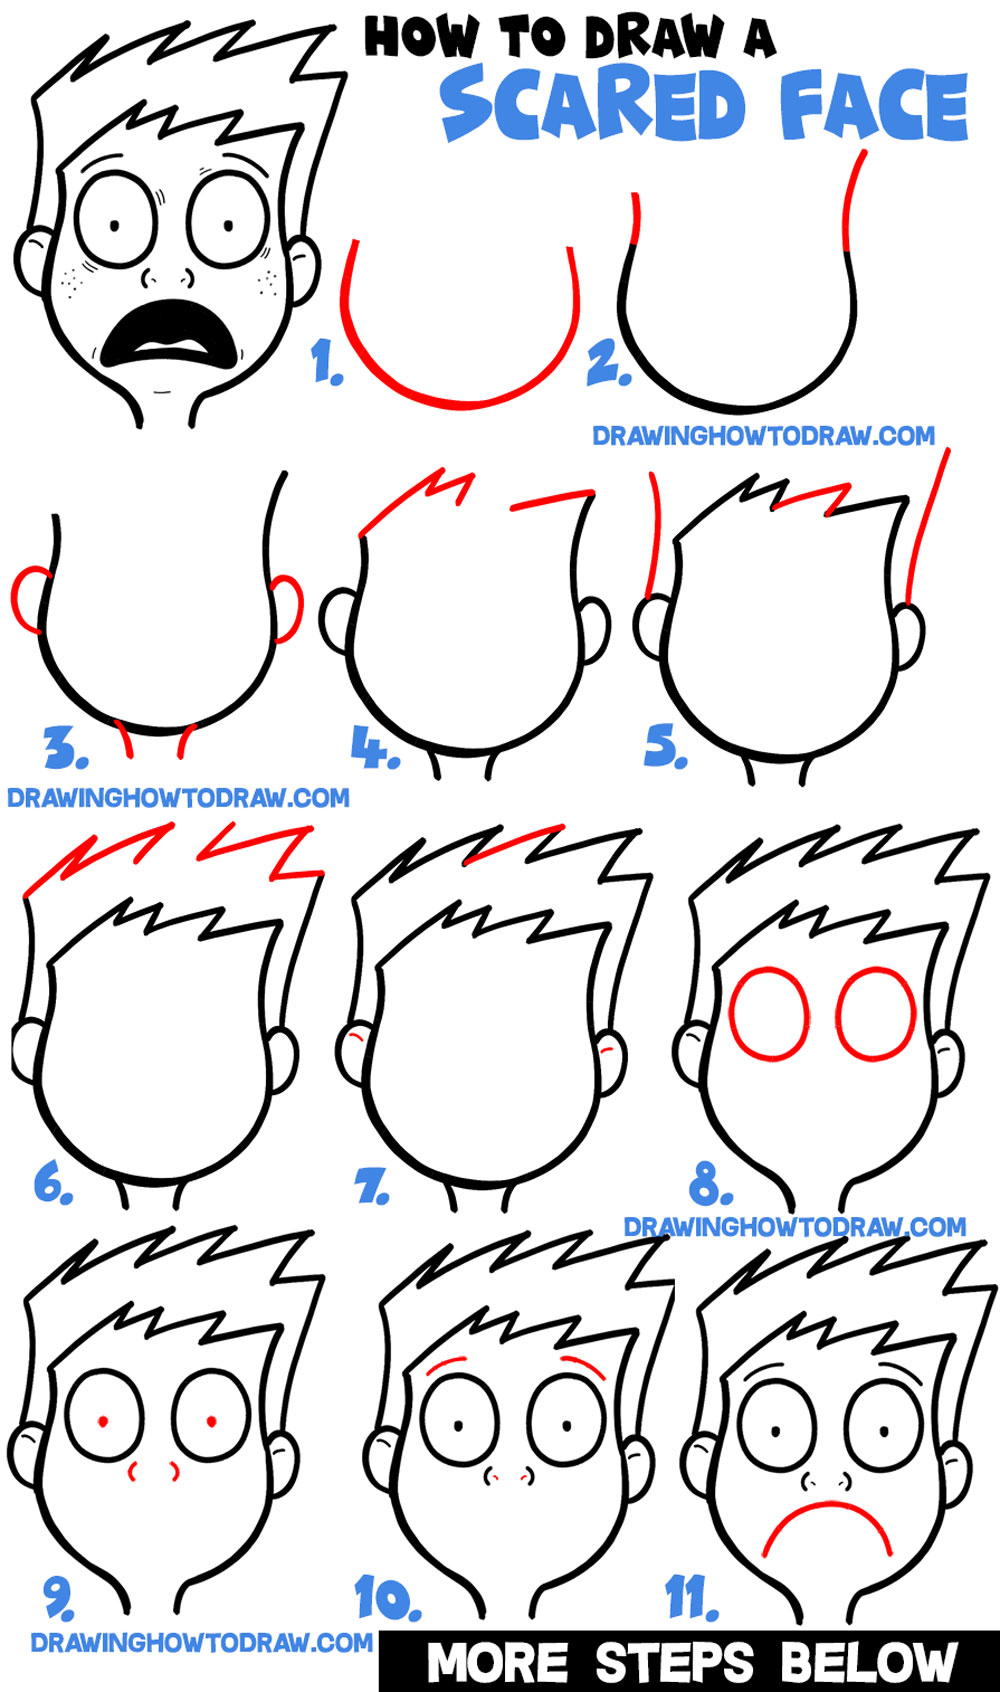 How to Draw a Scared Person - Easy Drawings 